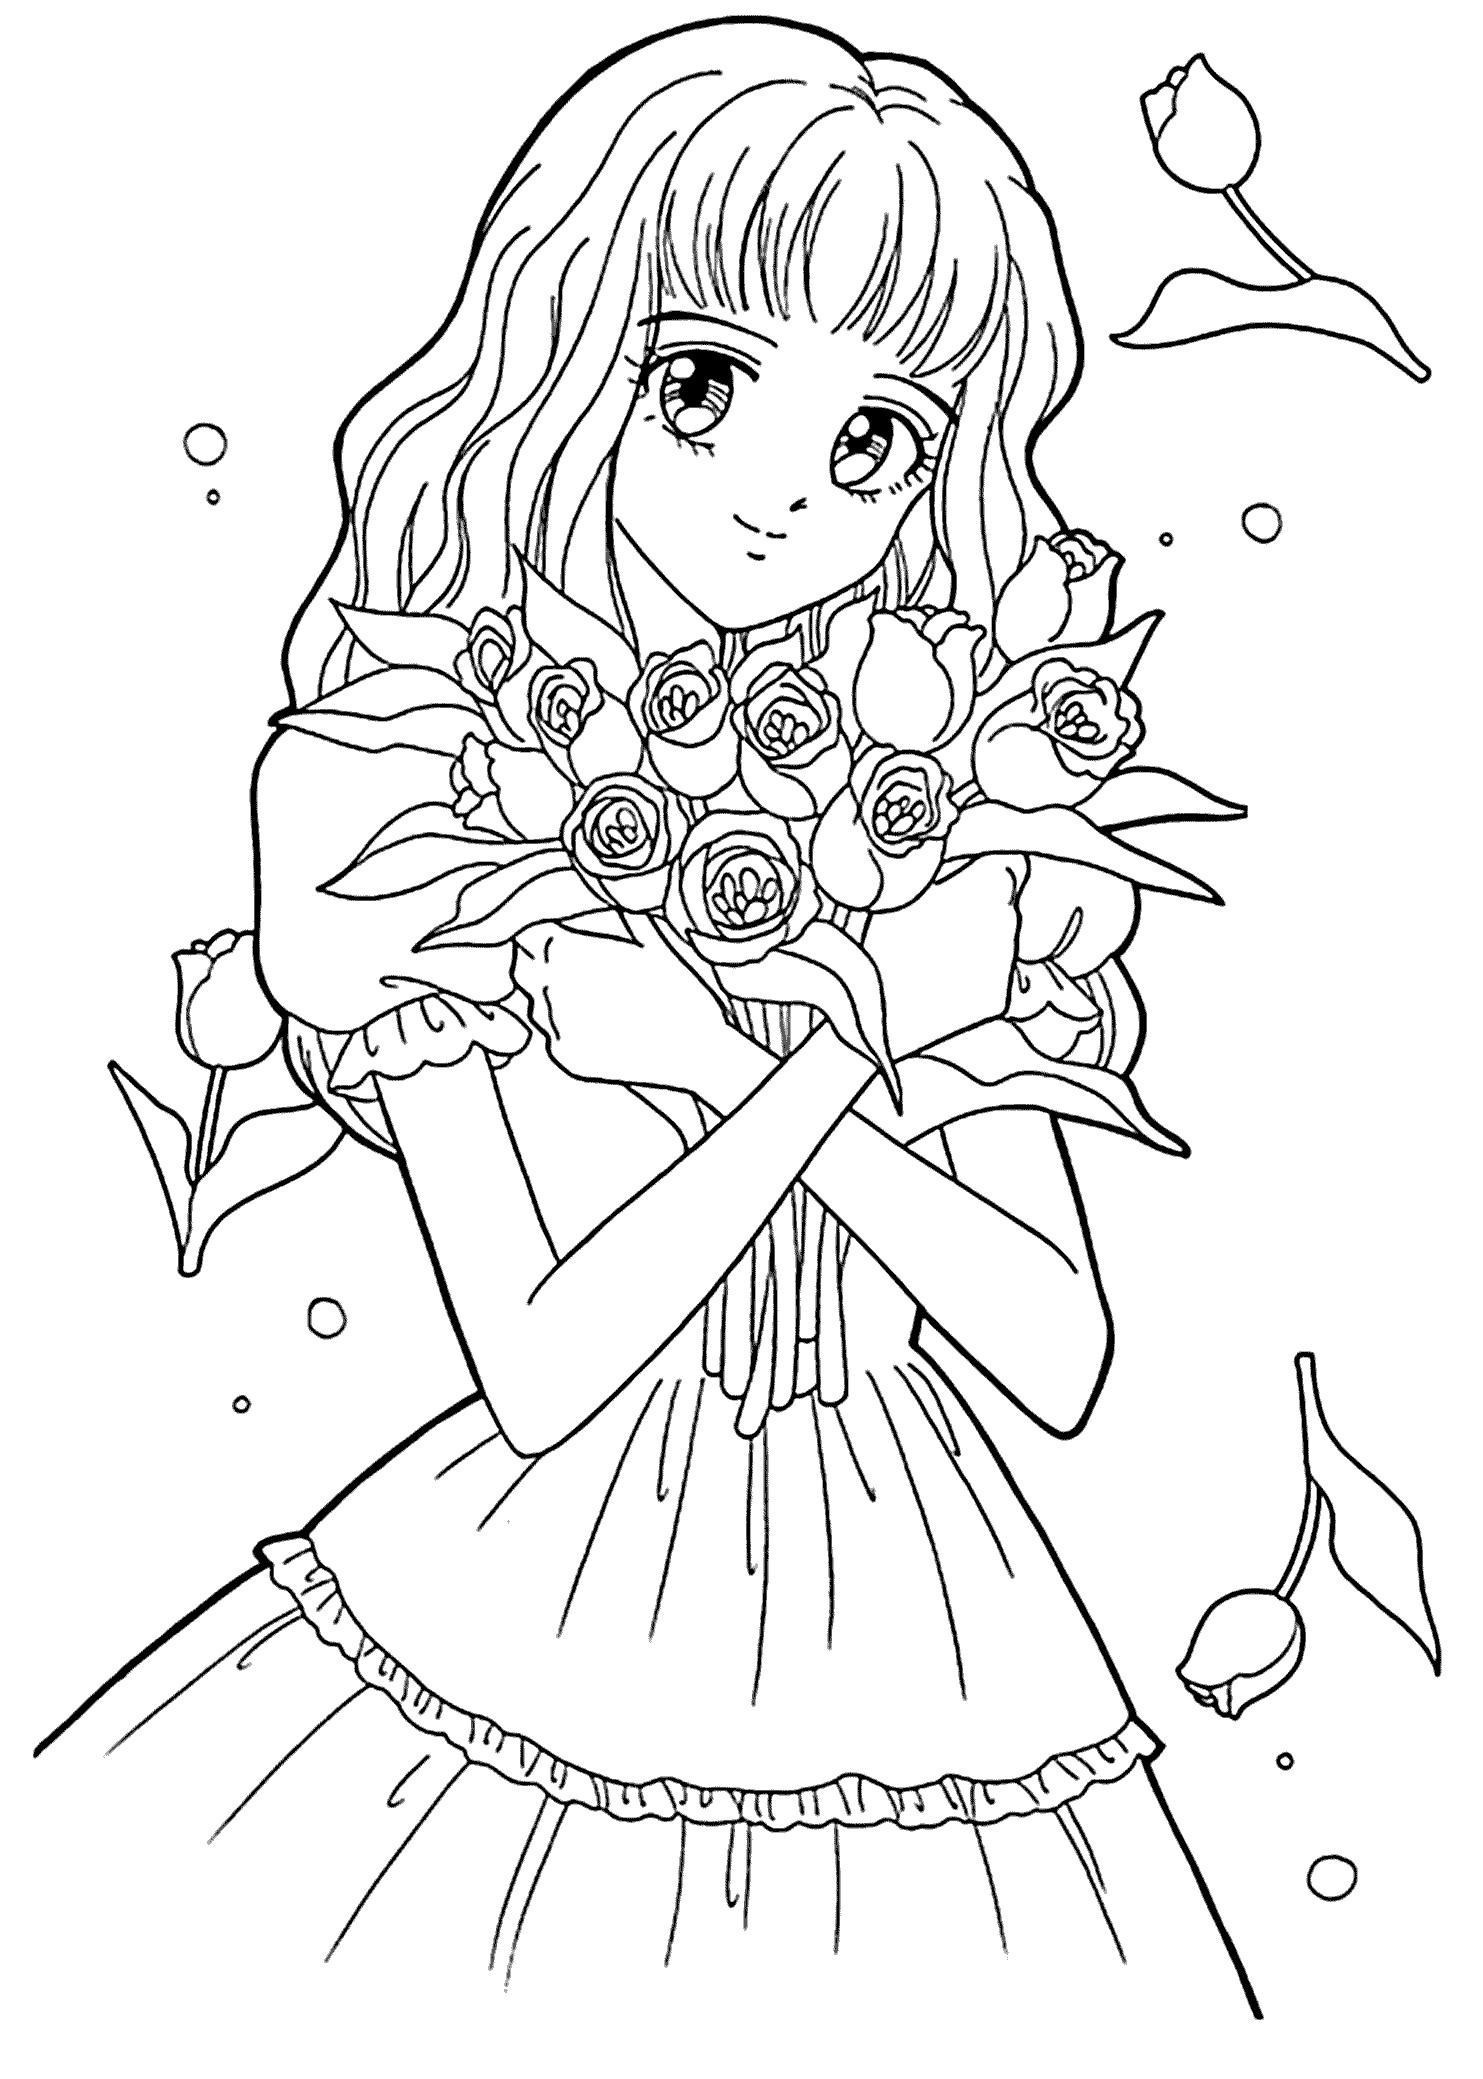 Coloring Sheets For Girls To Prin
 Best Free Printable Coloring Pages for Kids and Teens